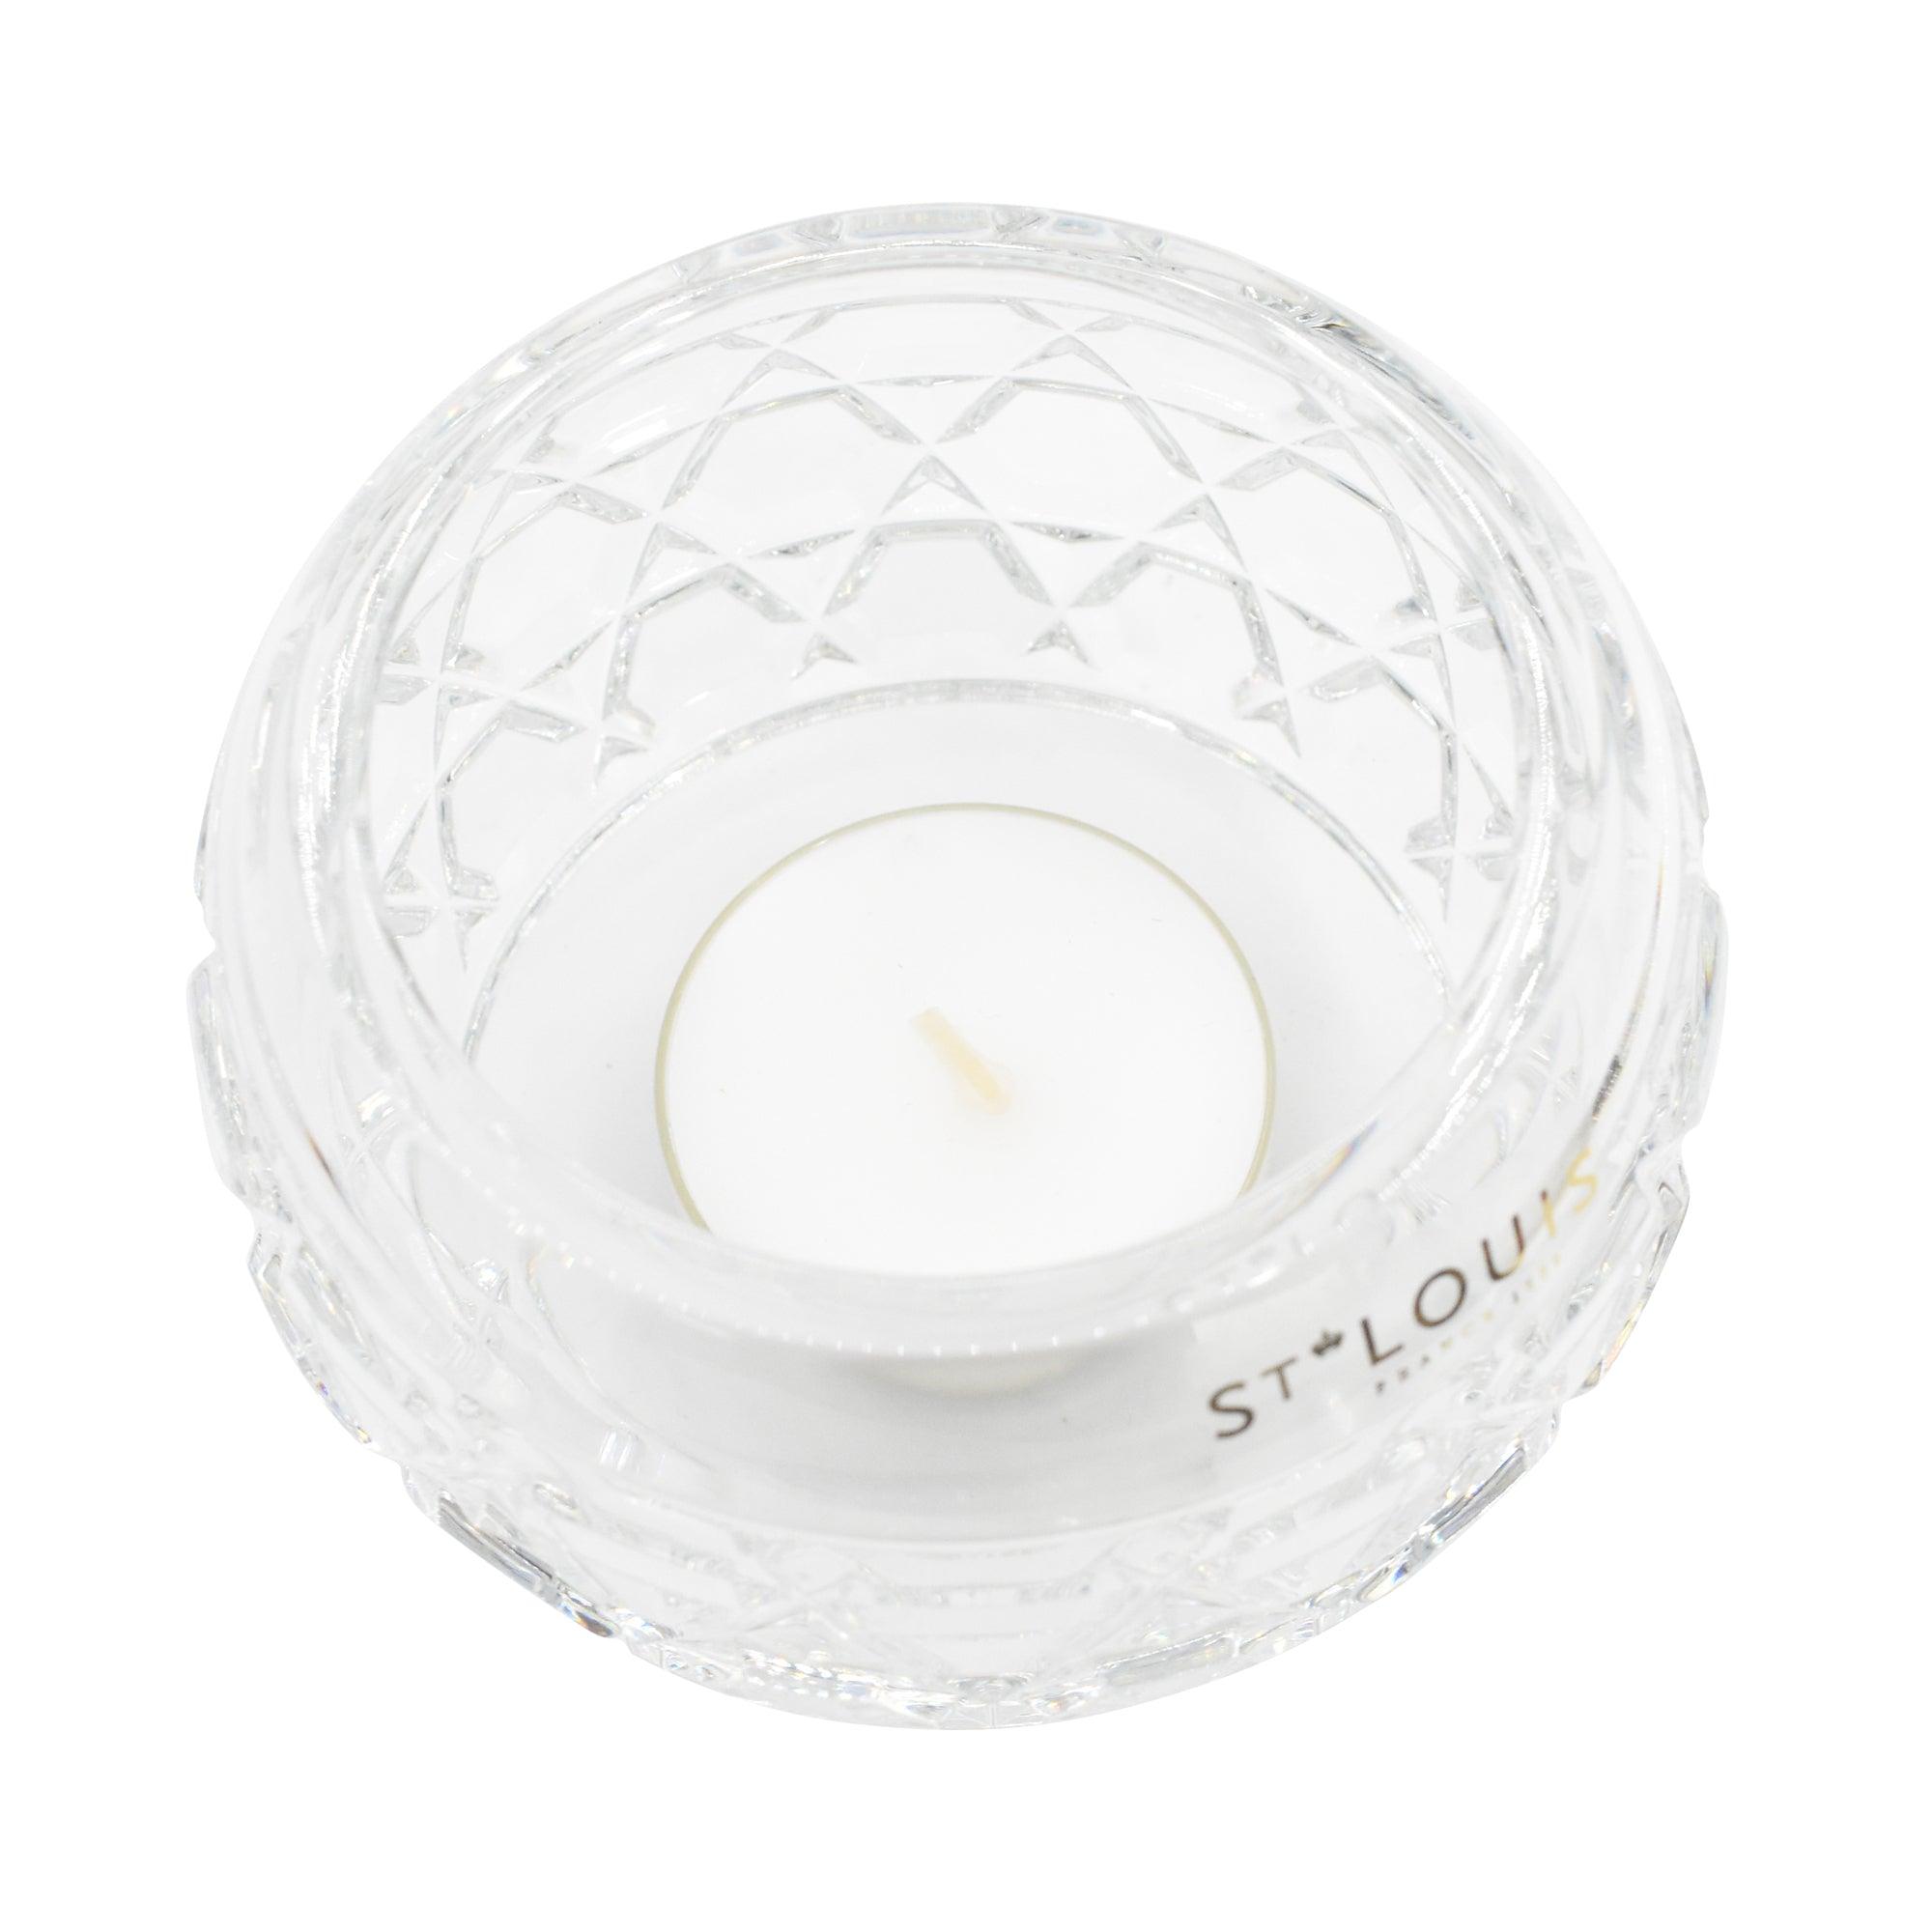 St Louis Candle Votive - Fashionably Yours